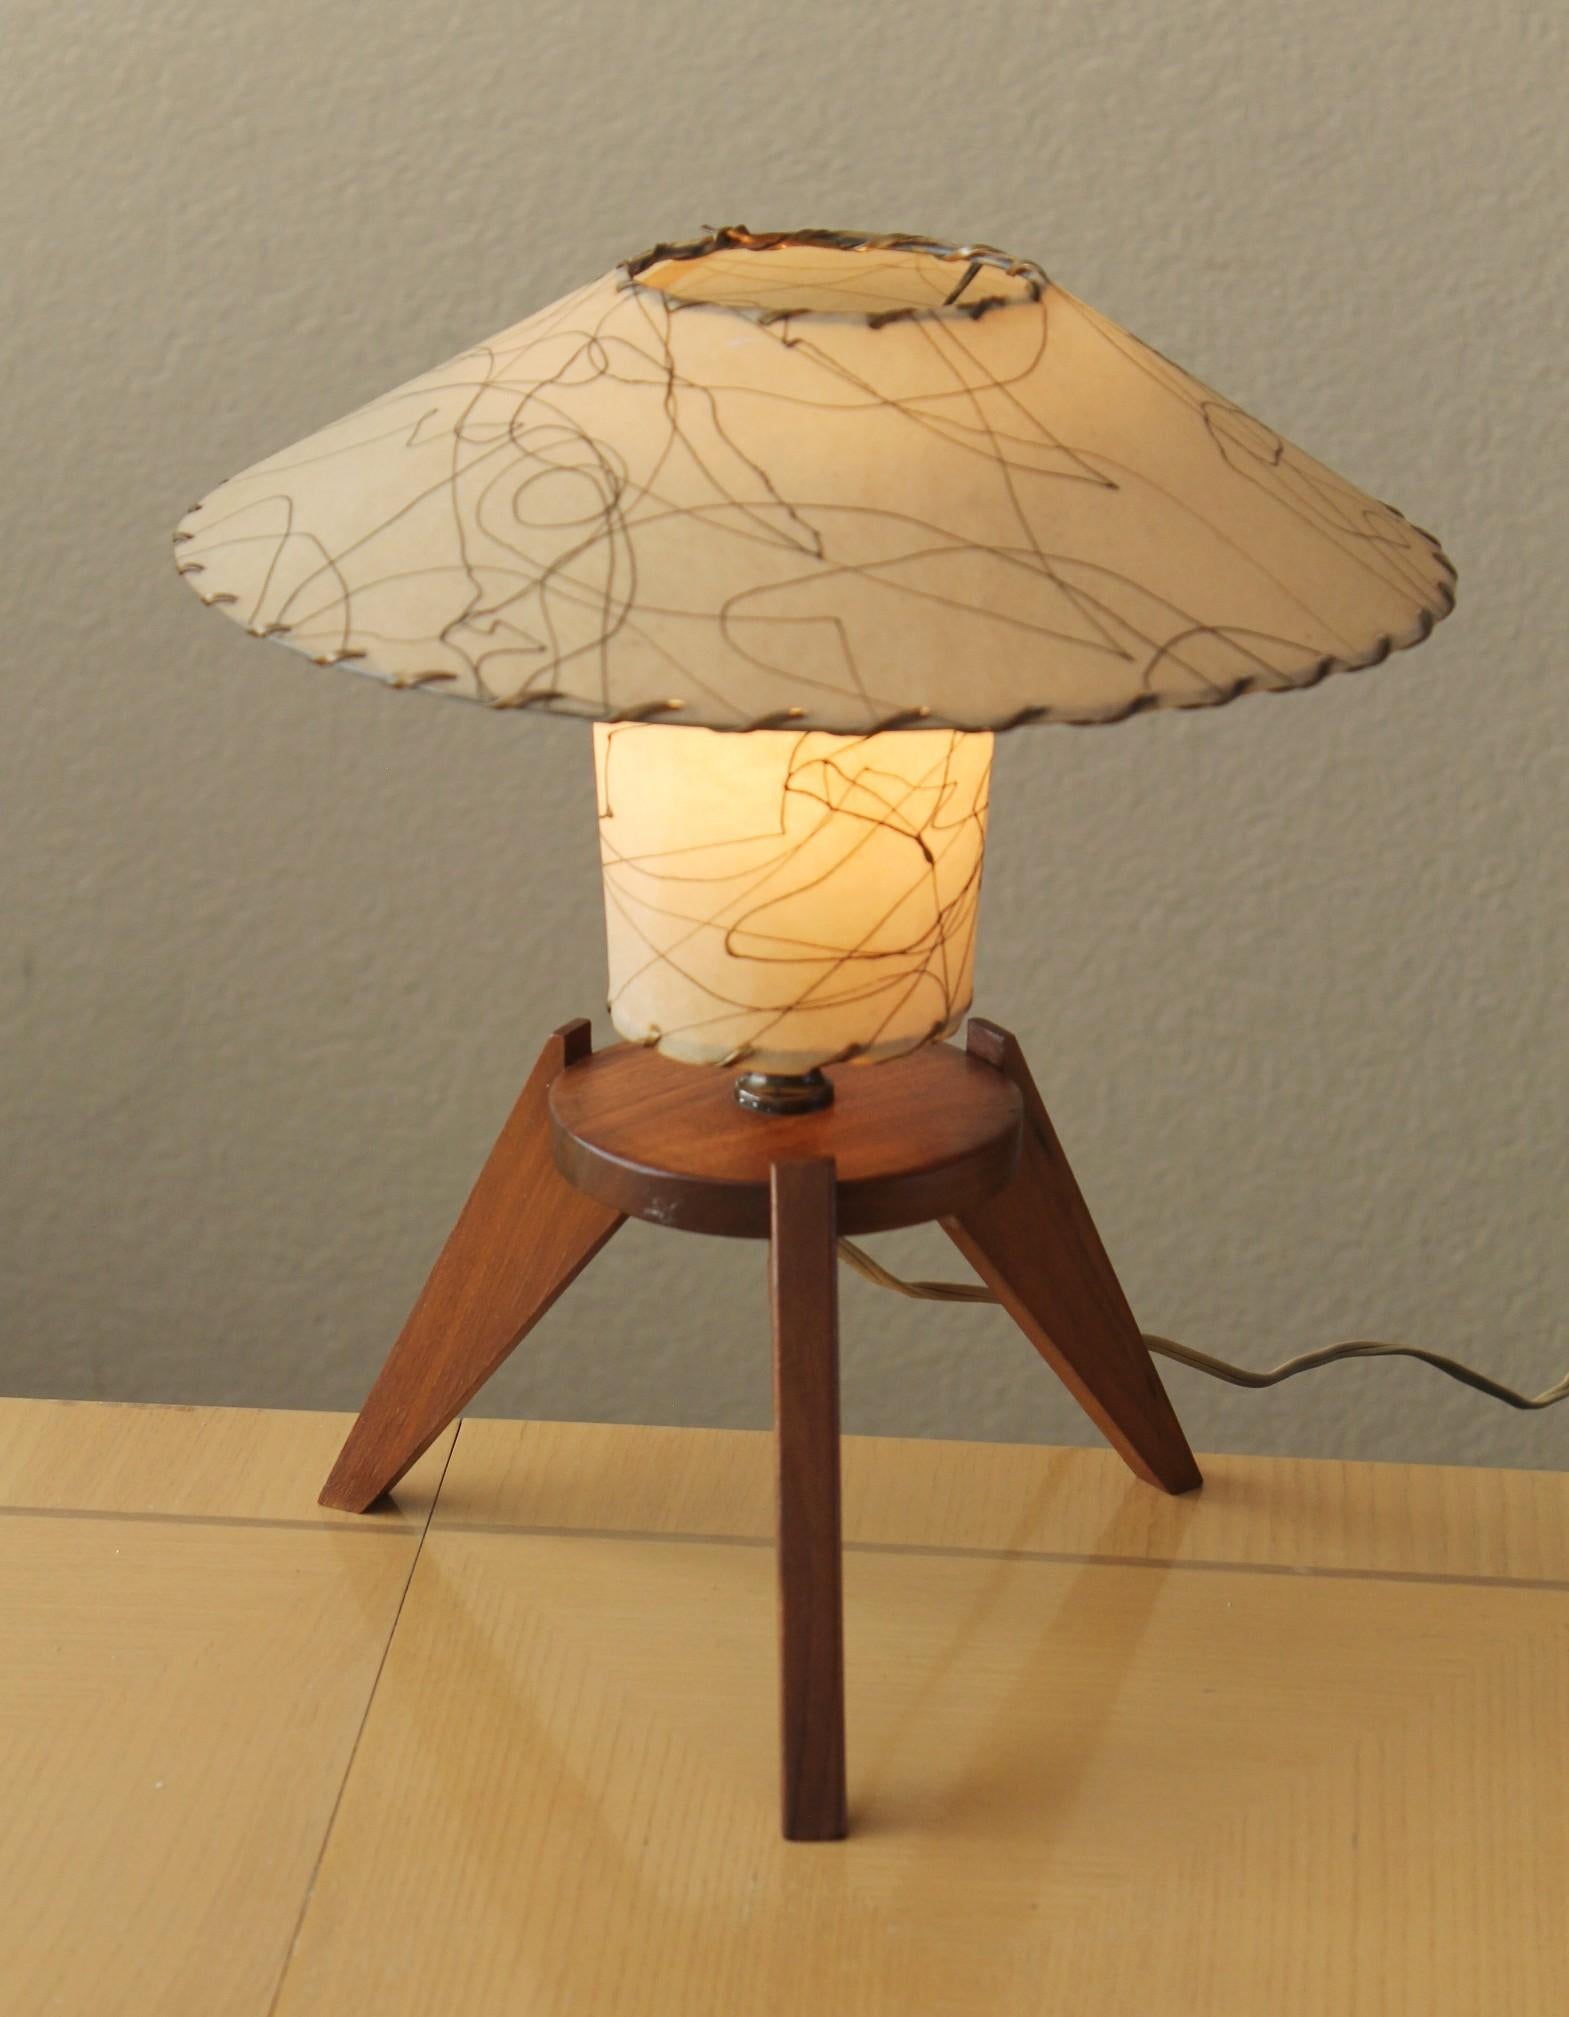 Hand-Crafted Glorious MId Century Danish Modern Atomic Fiberglass Shade Table Lamp 1950s For Sale